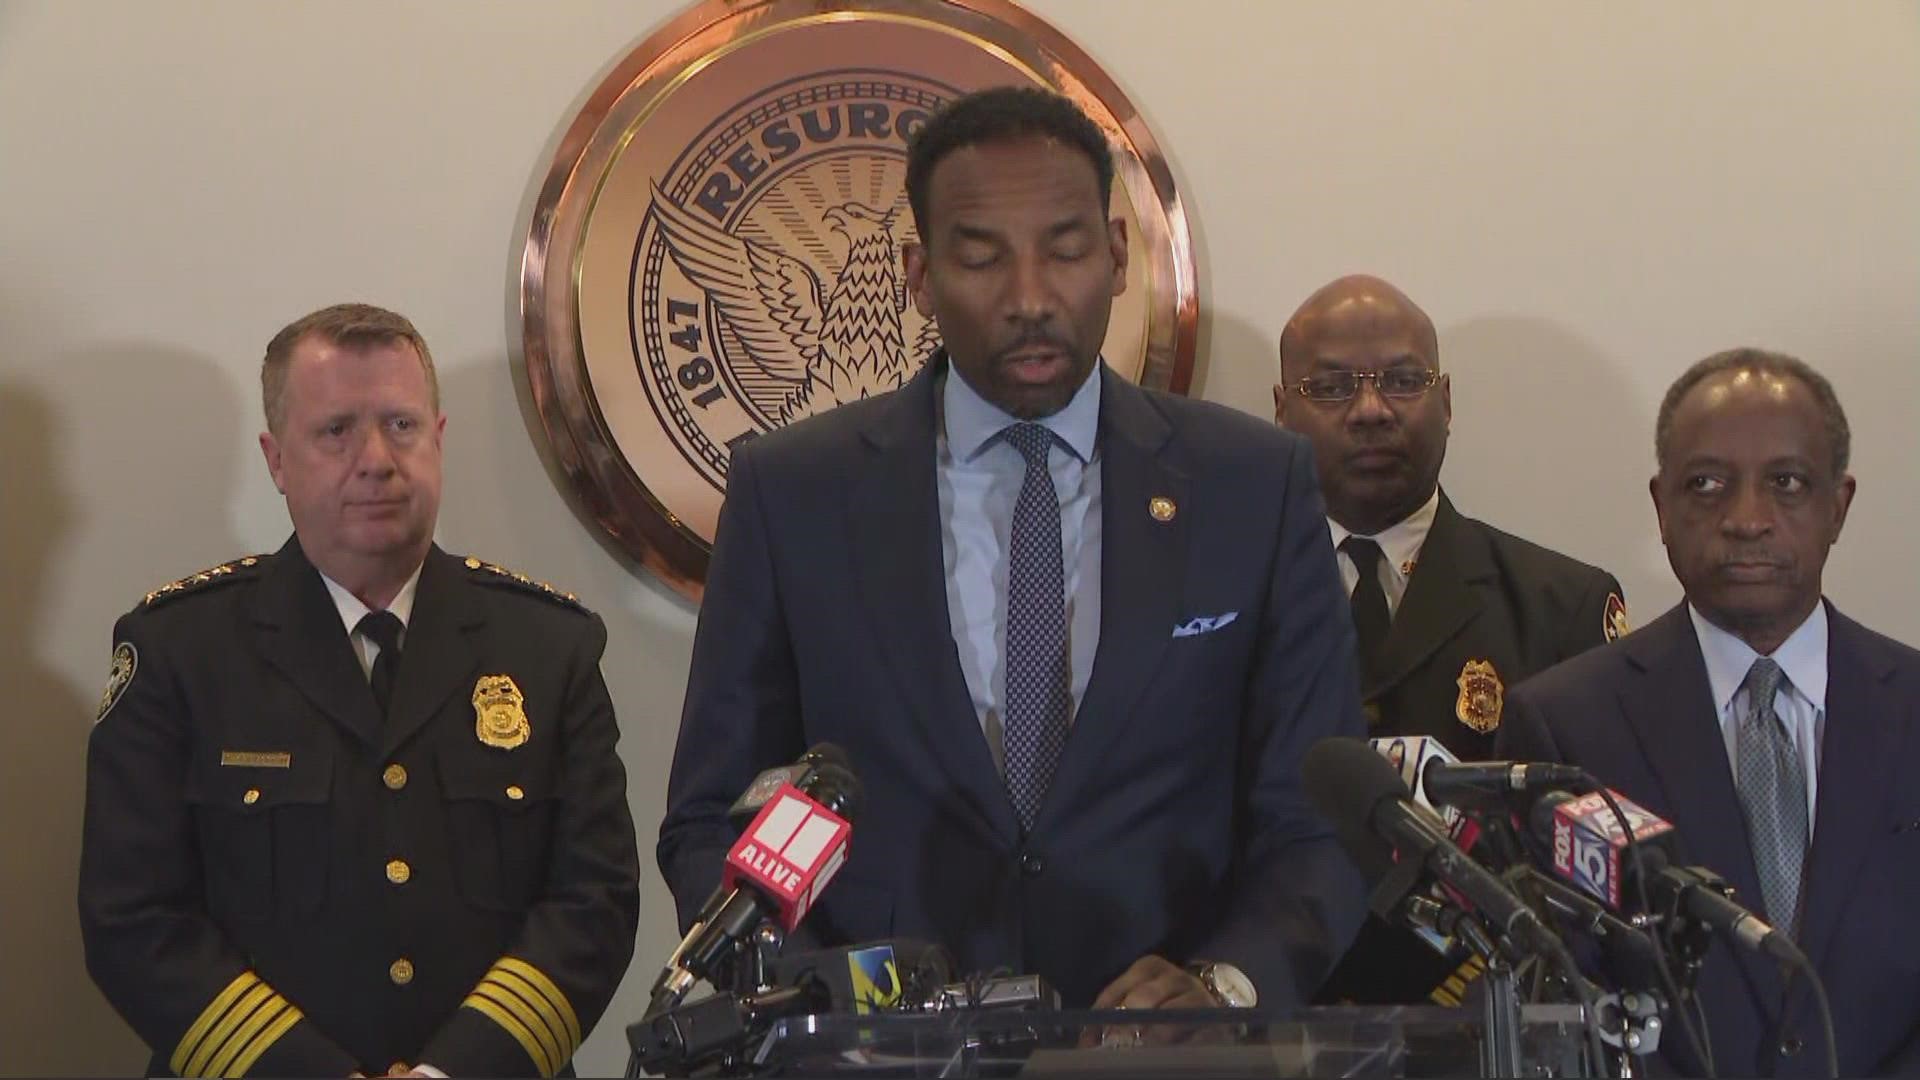 A release from the city said the mayor would join DeKalb CEO Michael Thurmond to announce new measures in their future police training site.